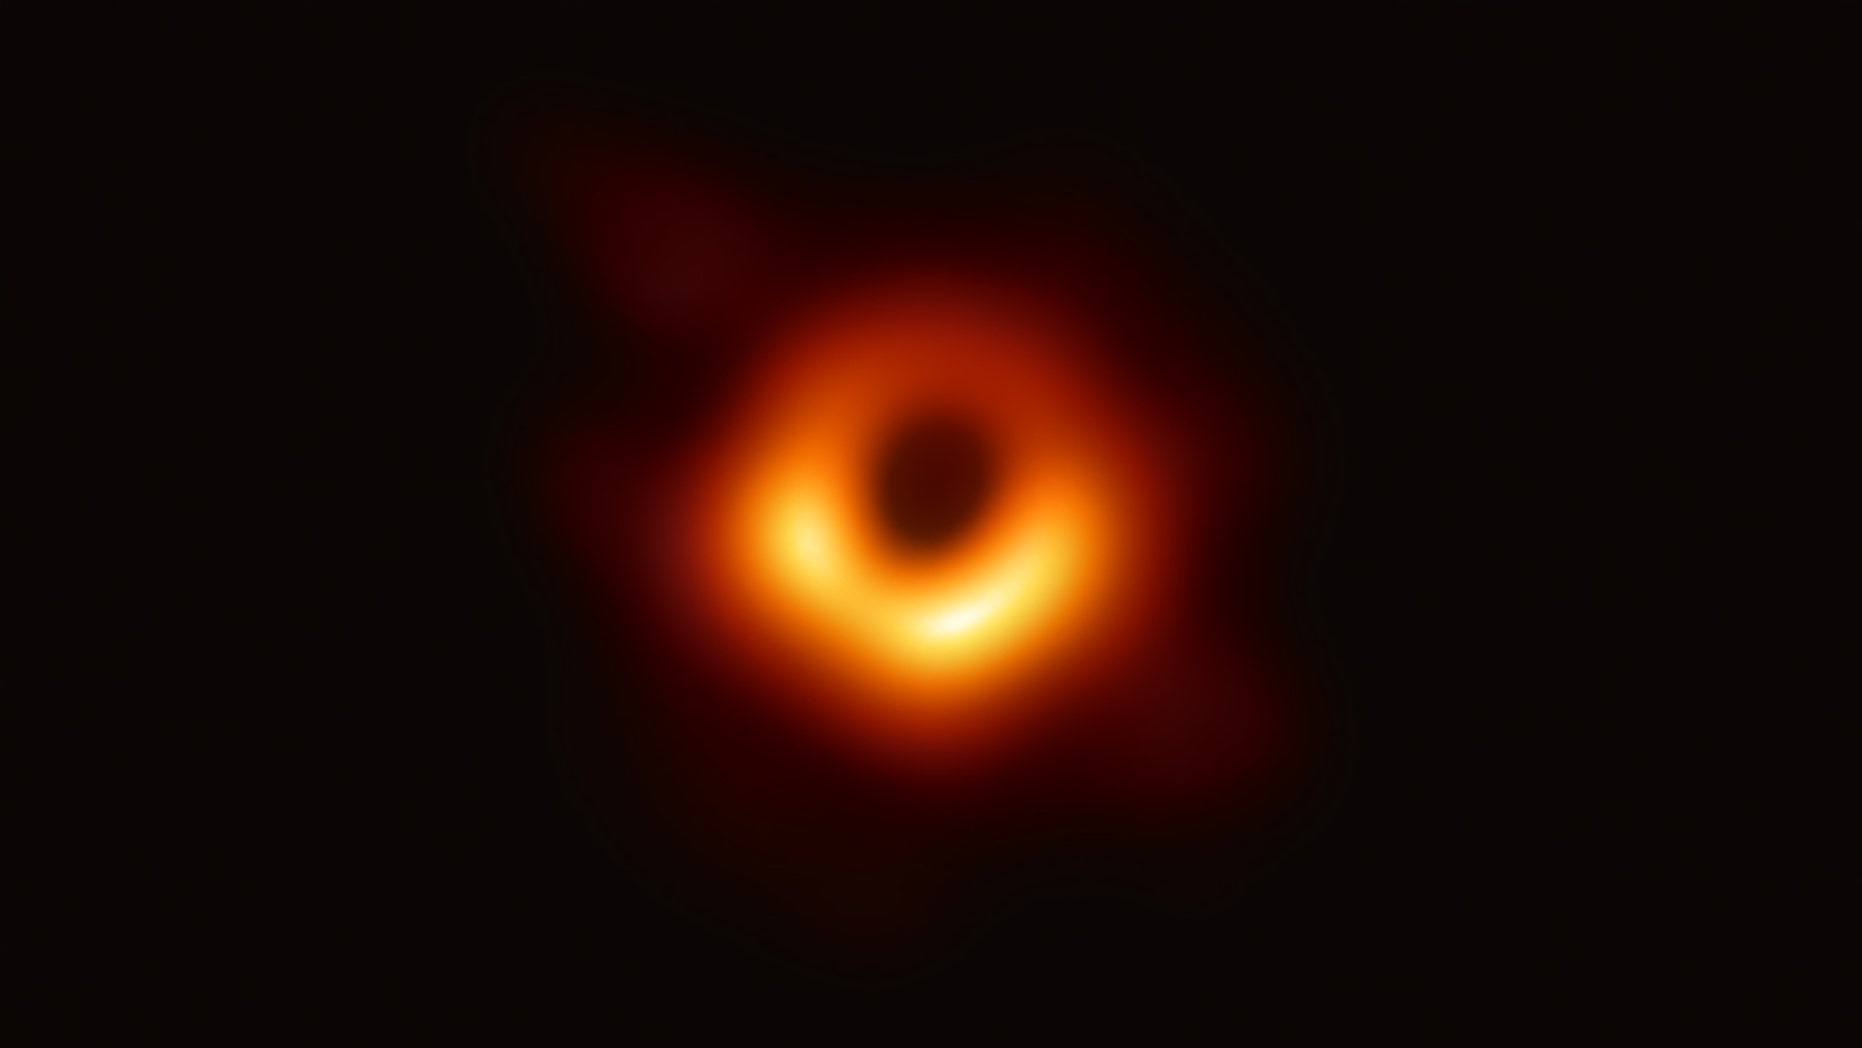 Scientists have obtained the first image of a black hole, using Event Horizon Telescope observations of the center of the galaxy M87.